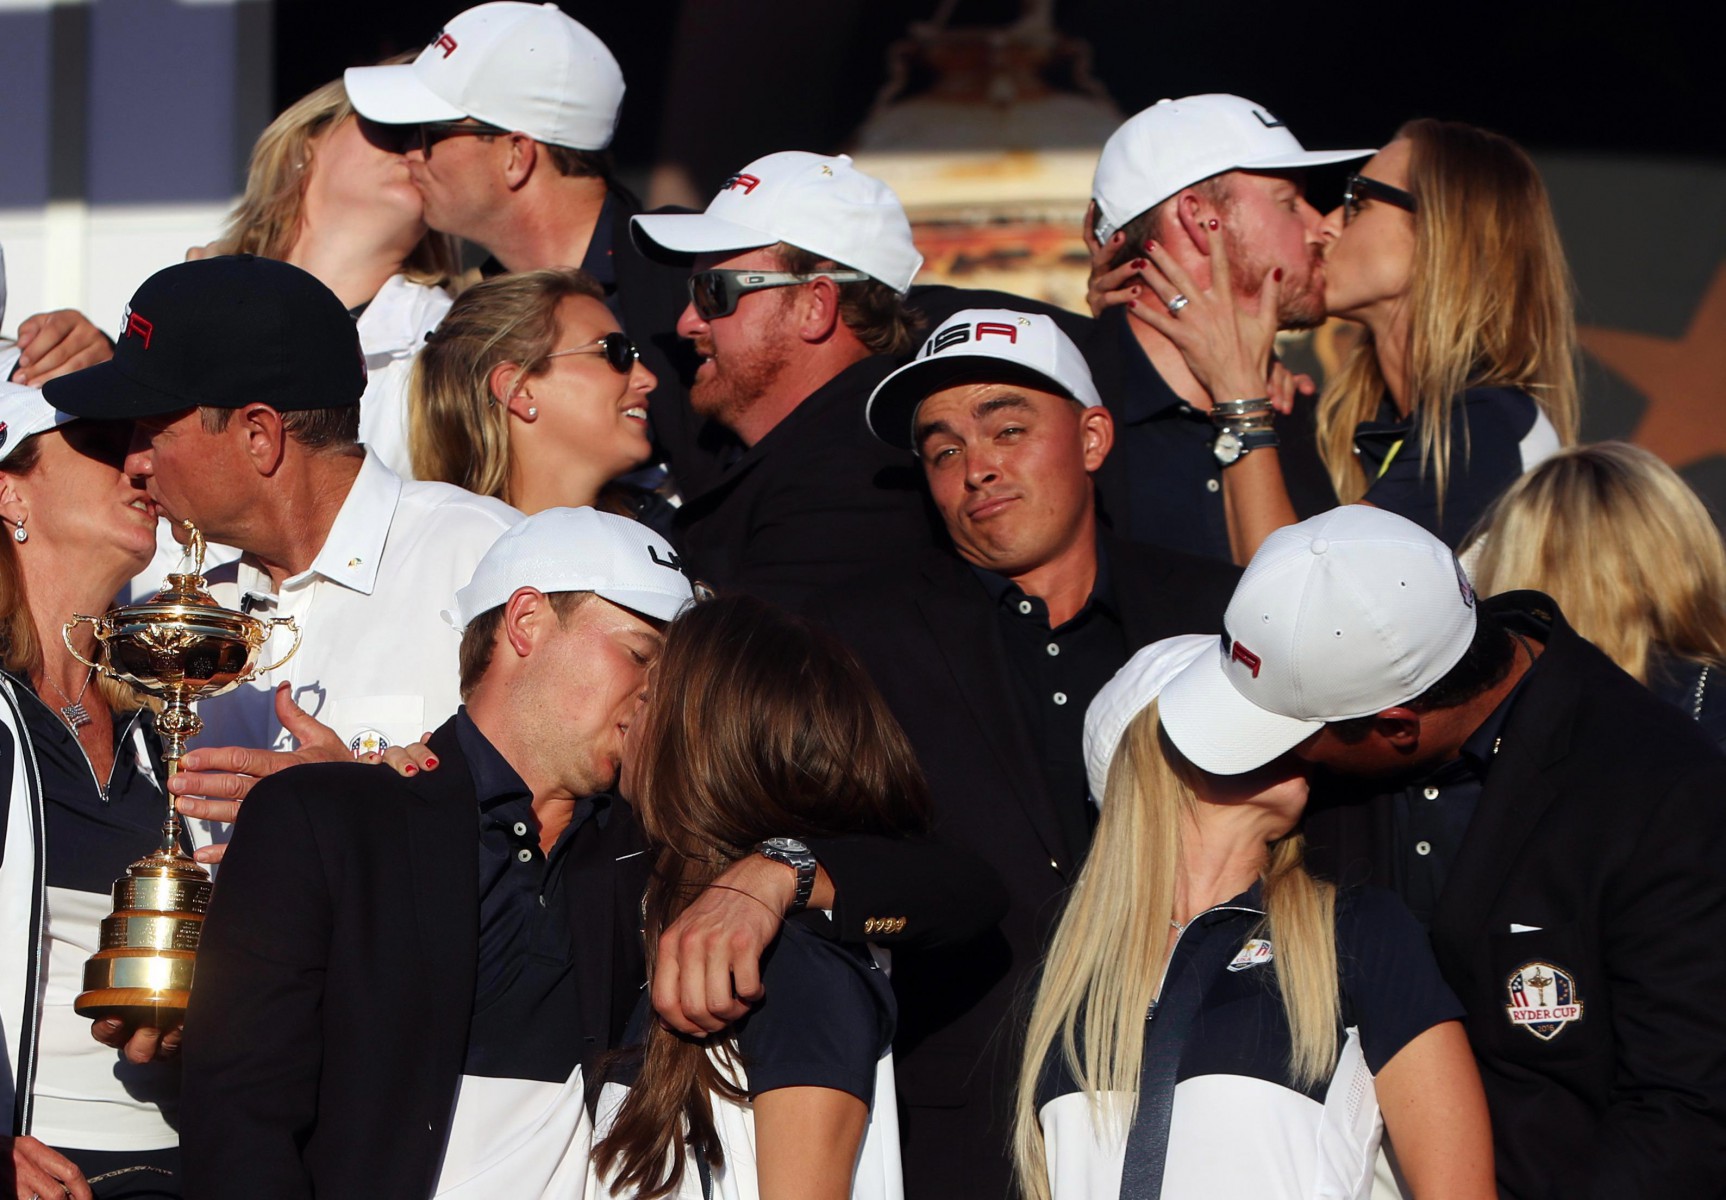 Rickie Fowler made up for his famous picture at the last Ryder Cup